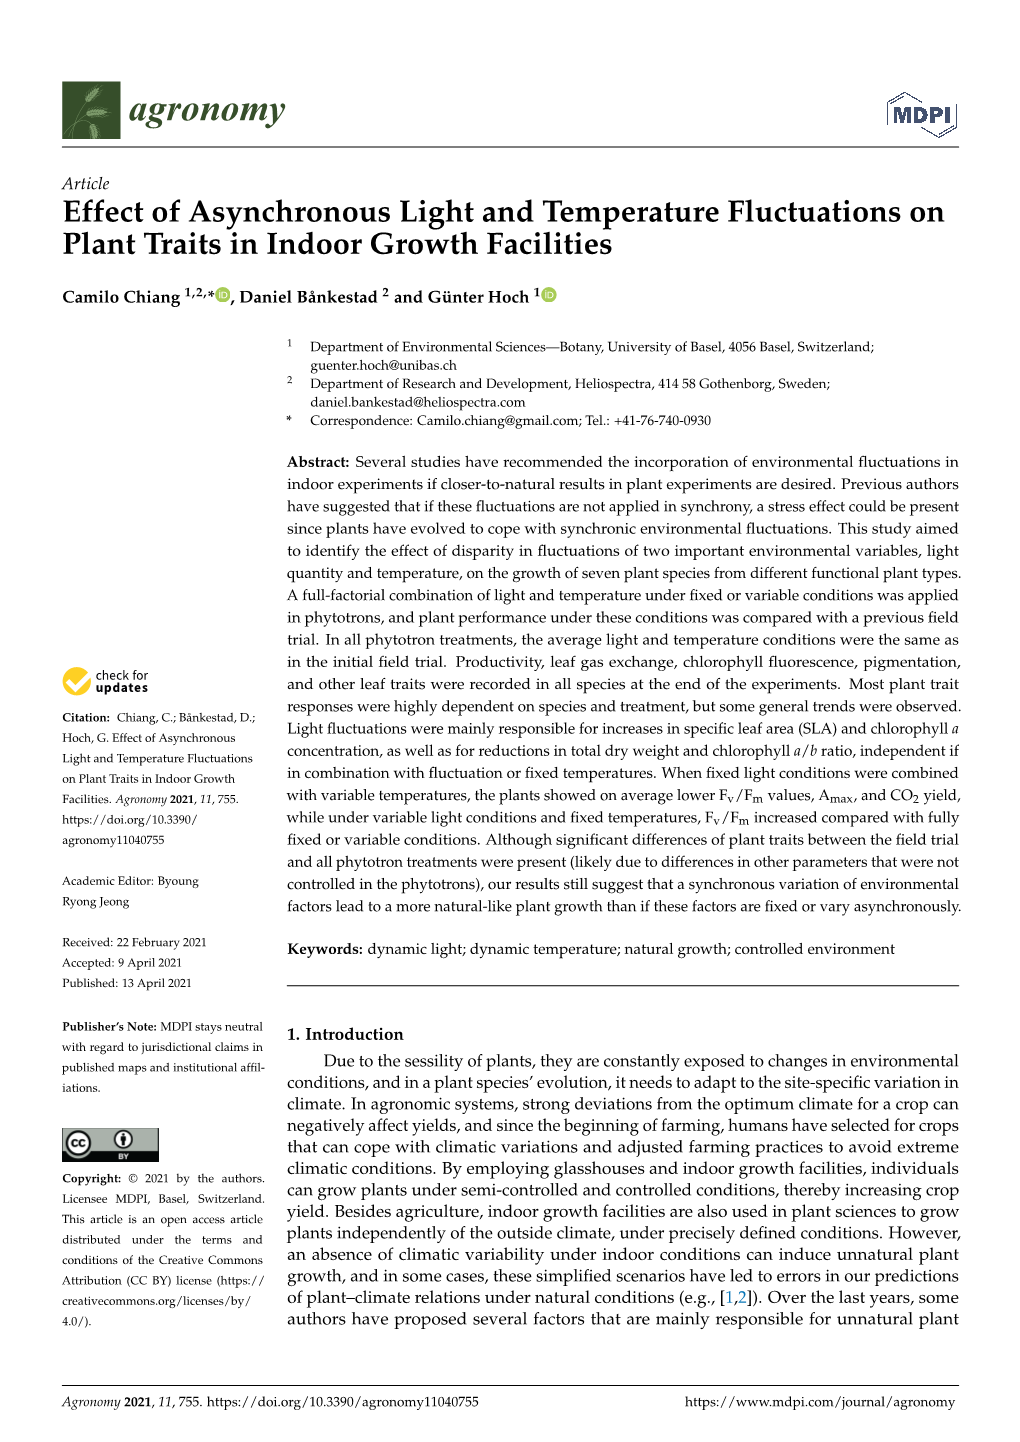 Effect of Asynchronous Light and Temperature Fluctuations on Plant Traits in Indoor Growth Facilities